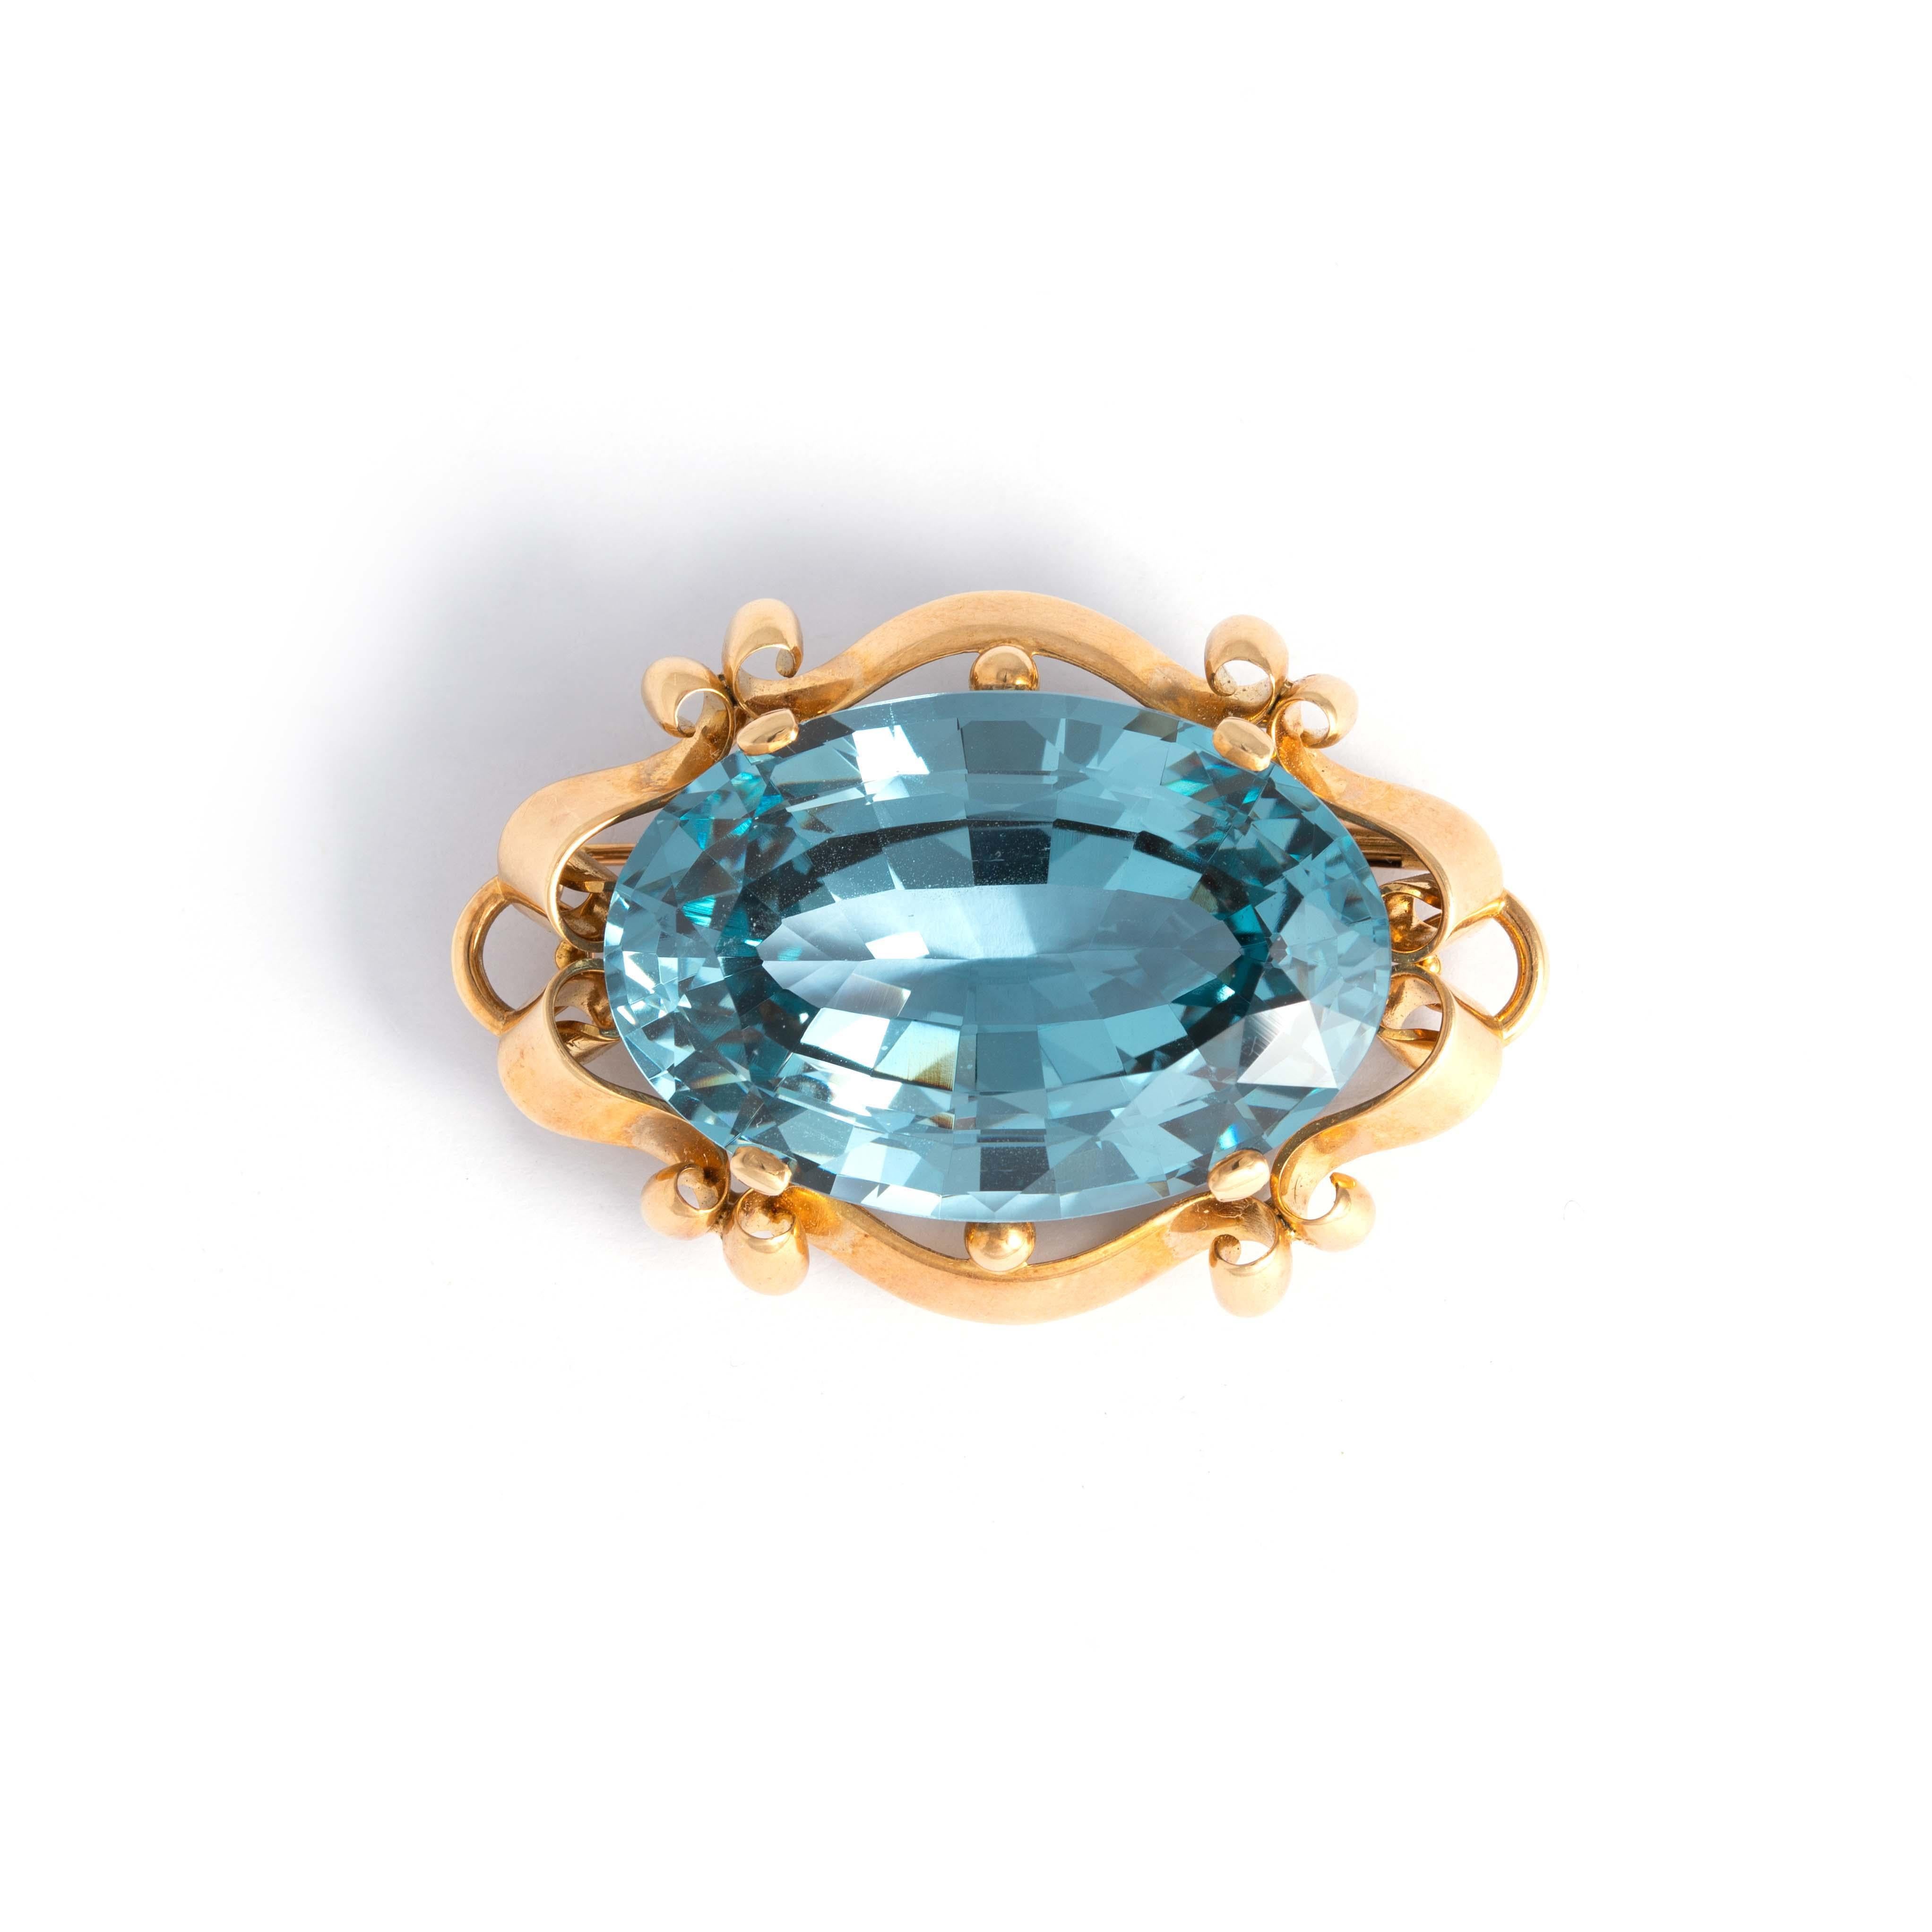 14K yellow gold brooch centered by a large oval-cut blue stone.
Dimensions: 4.60 centimeters x 3.00 centimeters.
Gross weight: 28.84 grams.